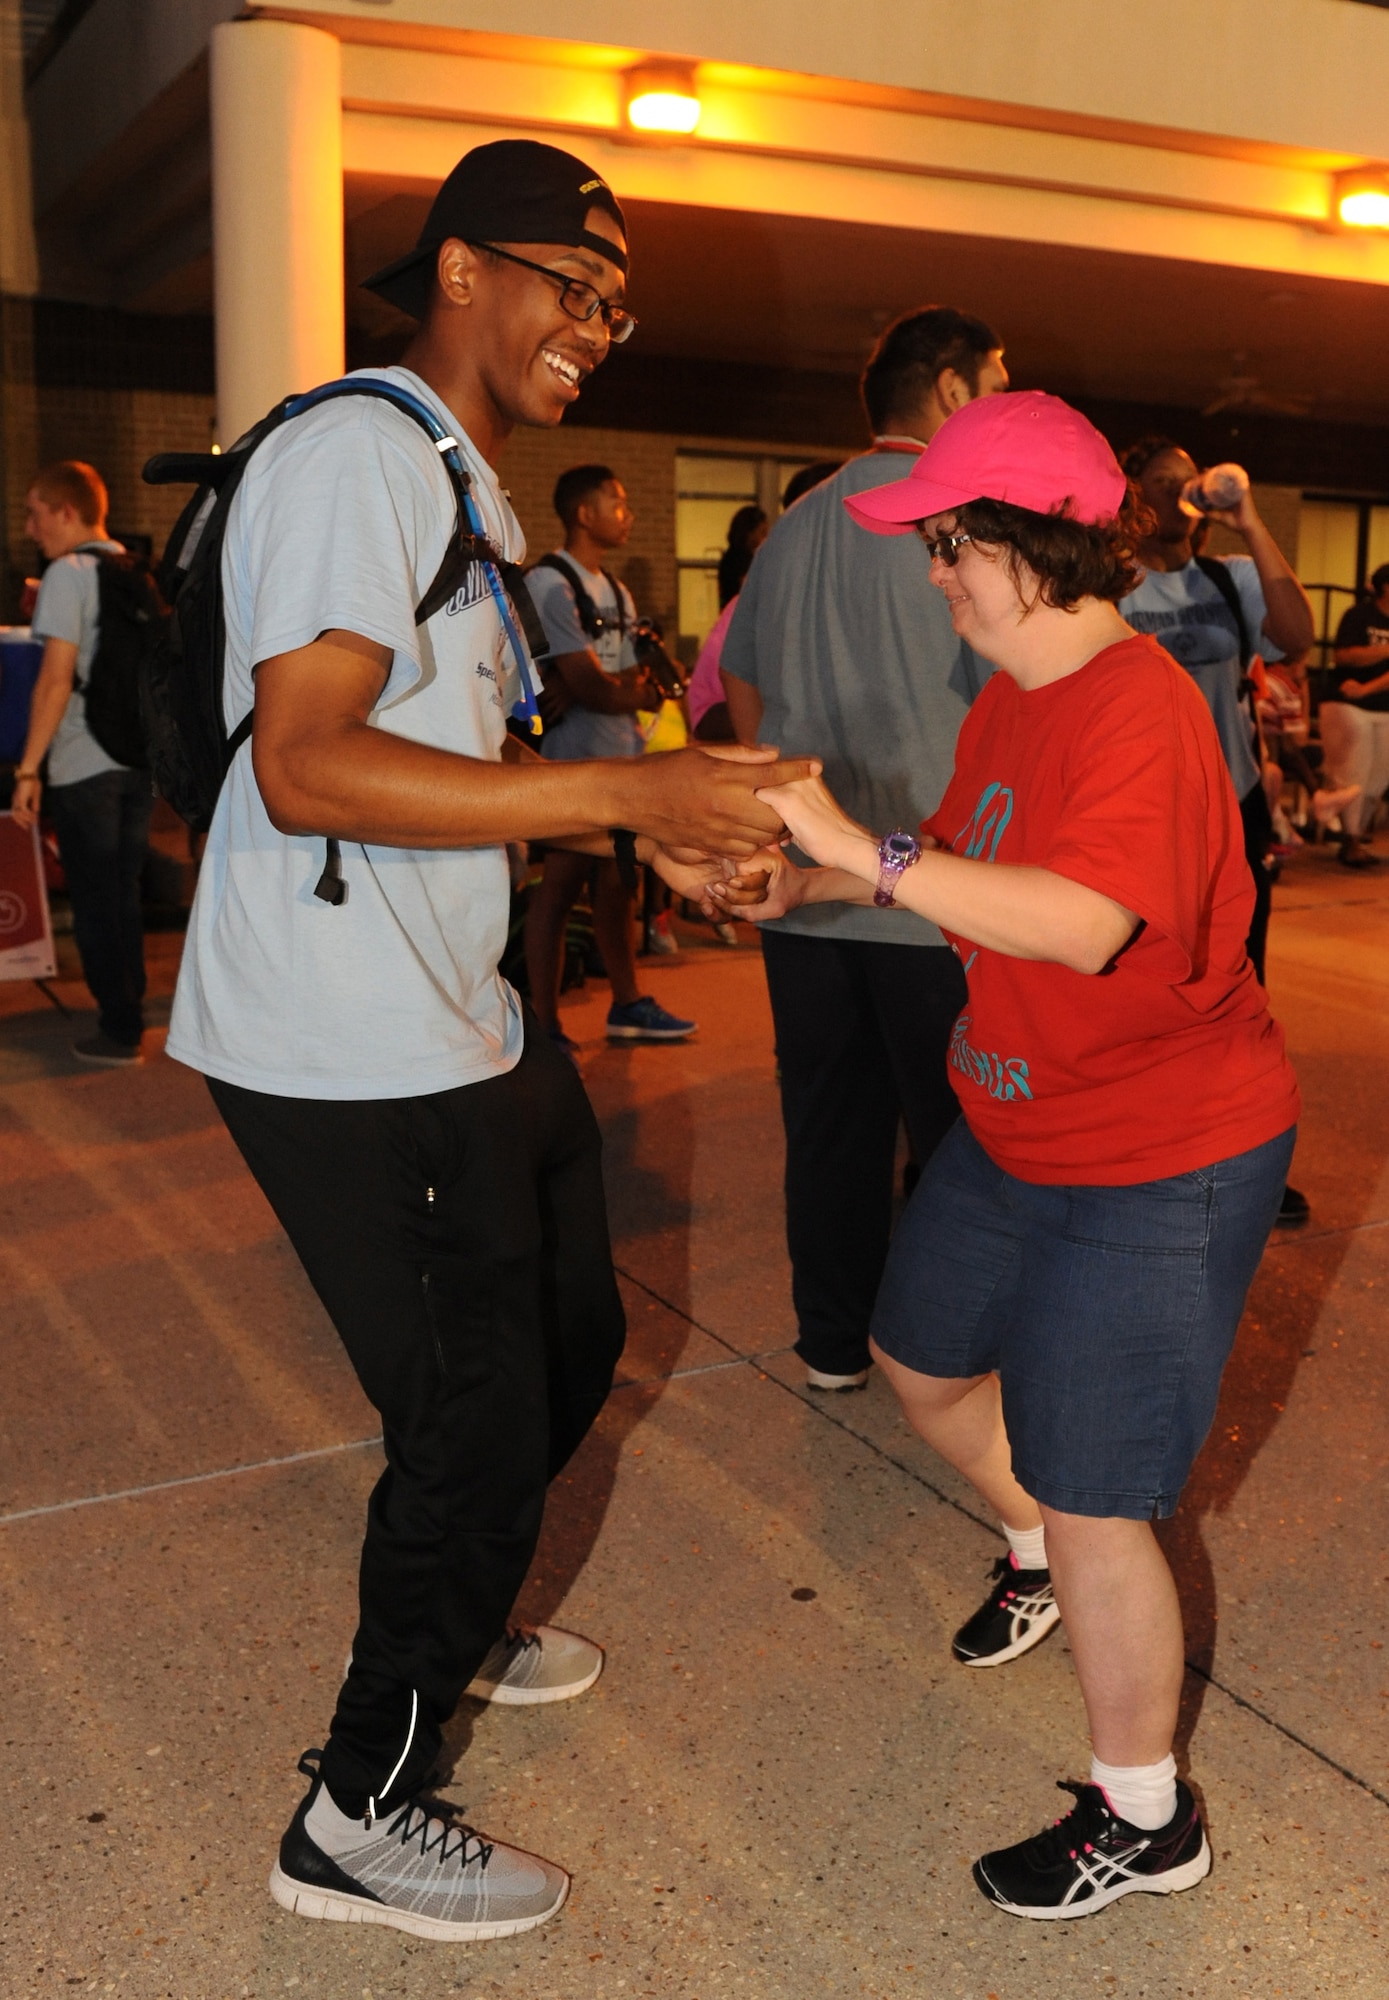 Airman Marcus Houston, 336th Training Squadron student, dances with Mary Wilson, Special Olympics athlete, at the Special Olympics Mississippi Summer Games closing ceremonies at the triangle area May 21, 2016, Keesler Air Force Base, Miss. This is the 30th year Keesler has hosted the state Special Olympics.  (U.S. Air Force photo by Kemberly Groue)